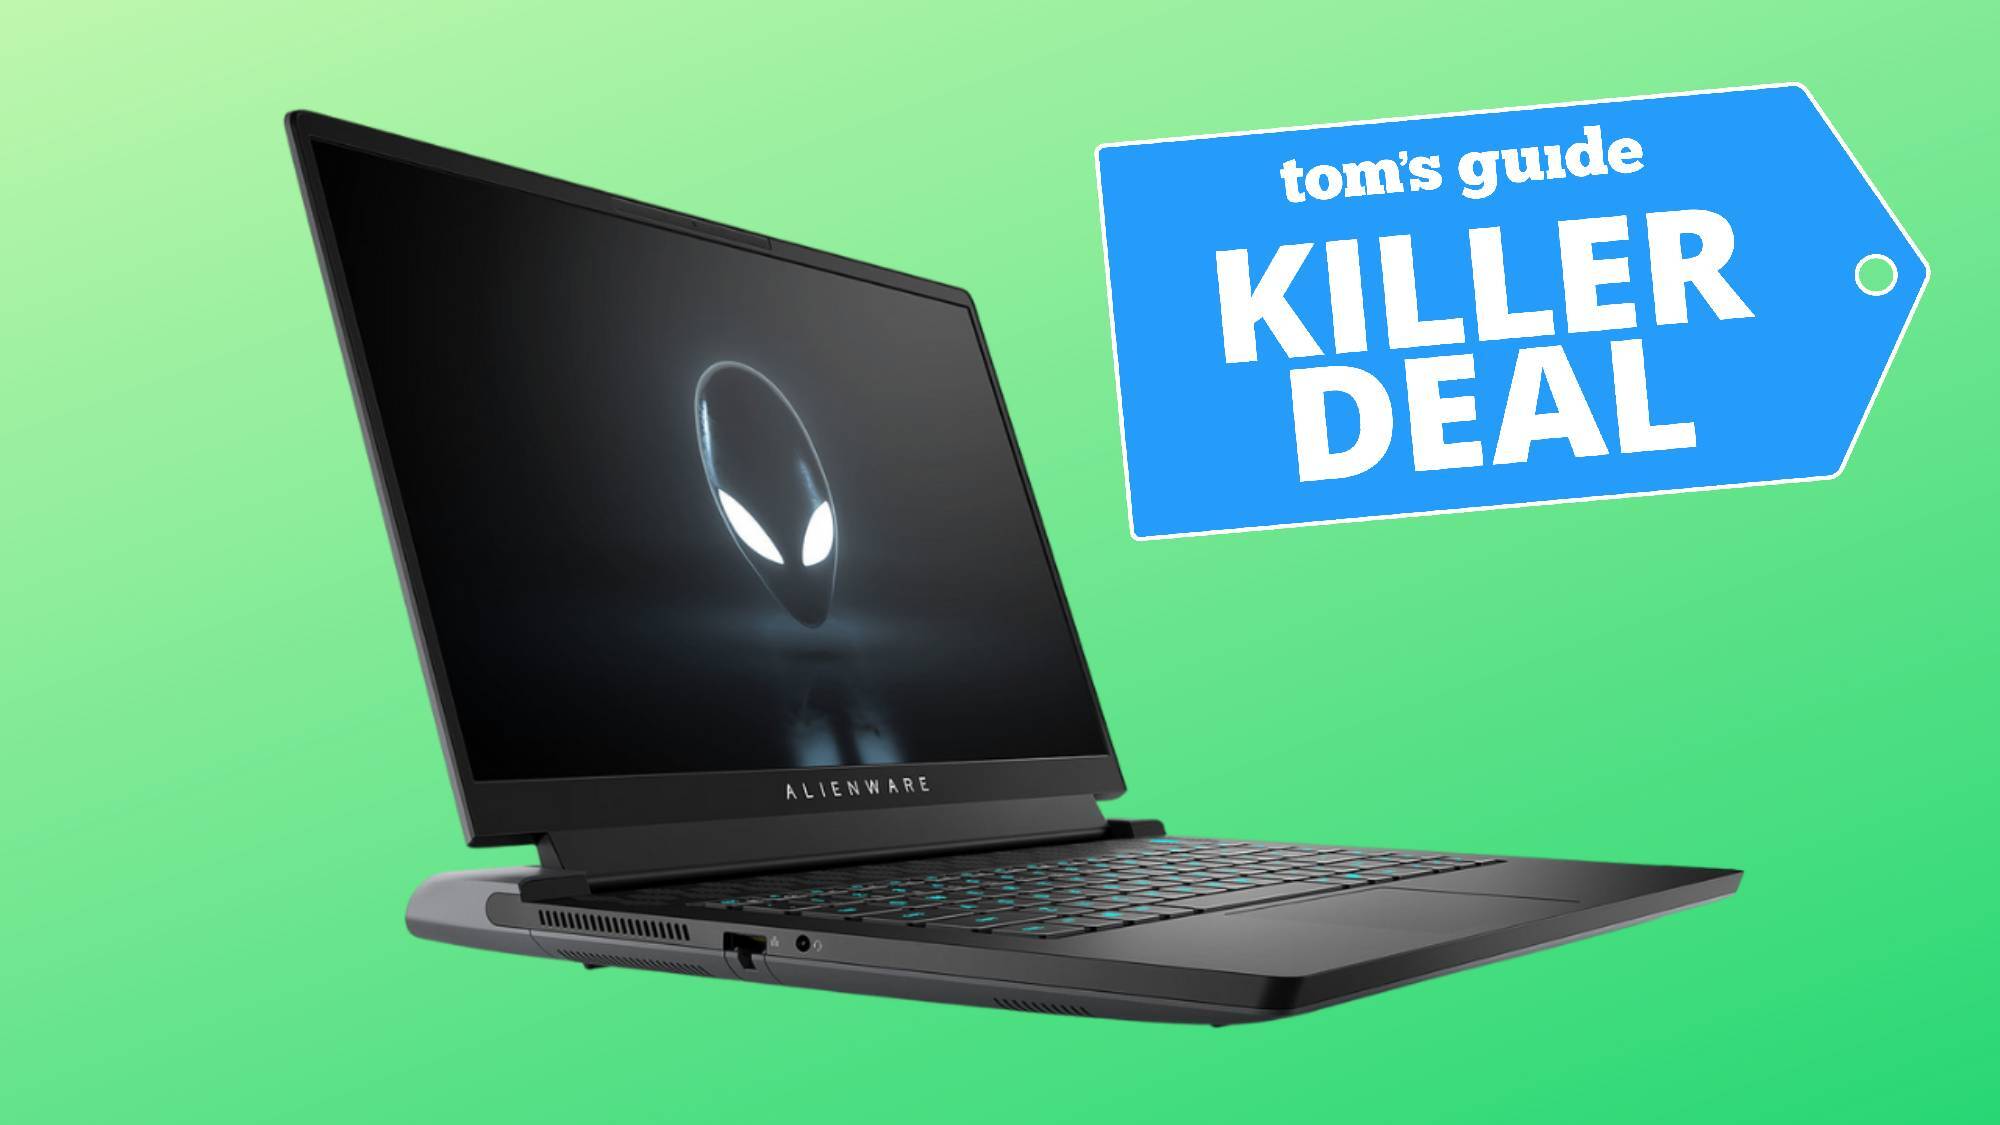 Alienware m15 R6 gaming laptop with a Tom's Guide offer tag